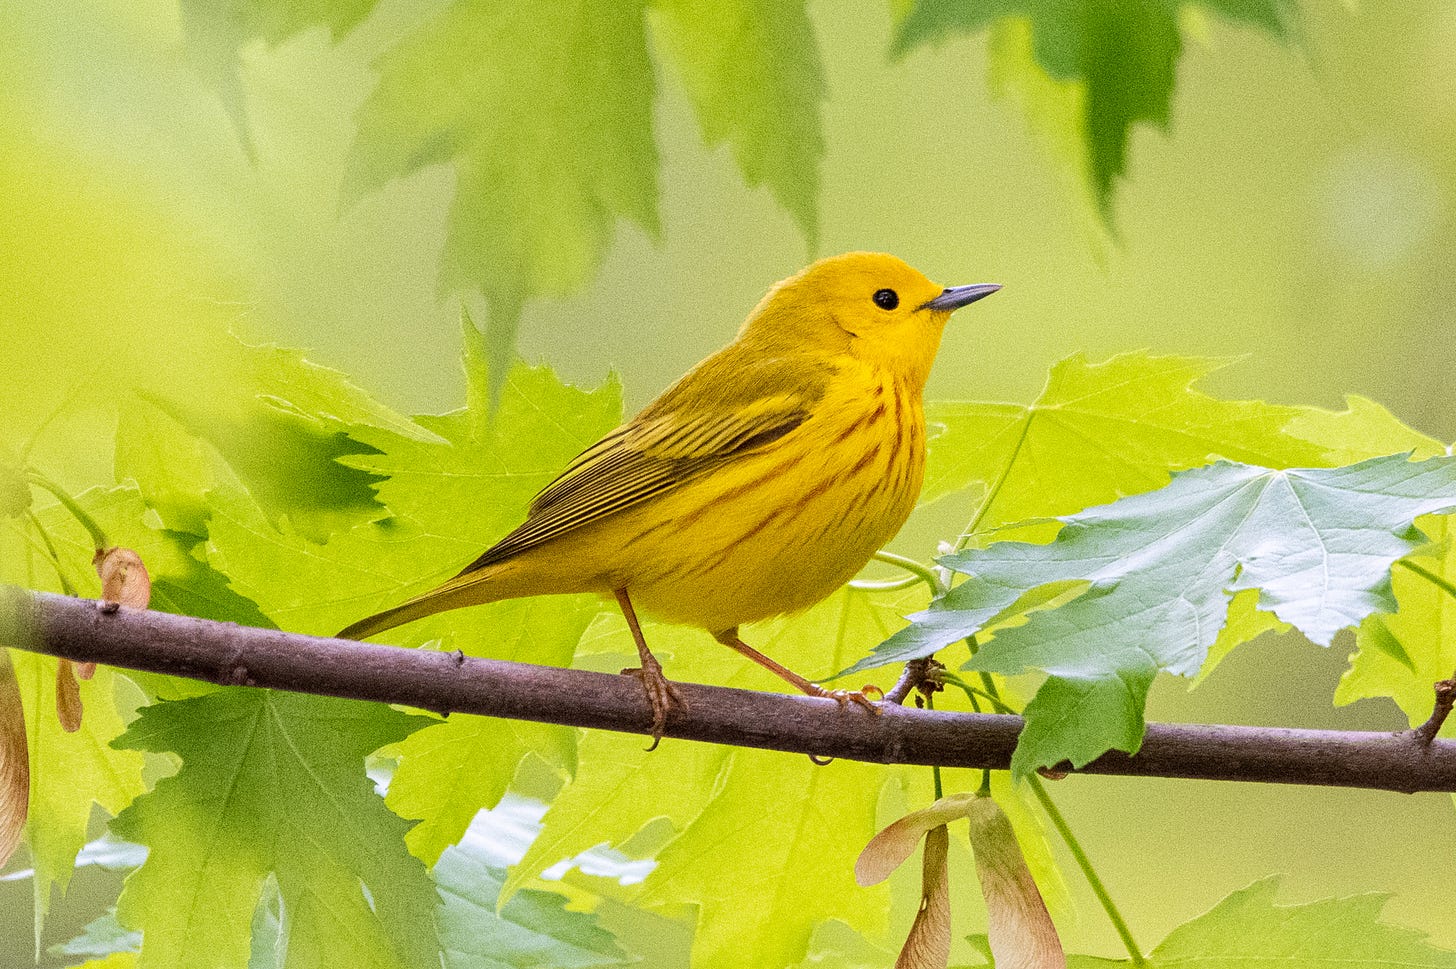 A yellow warbler perched in a maple